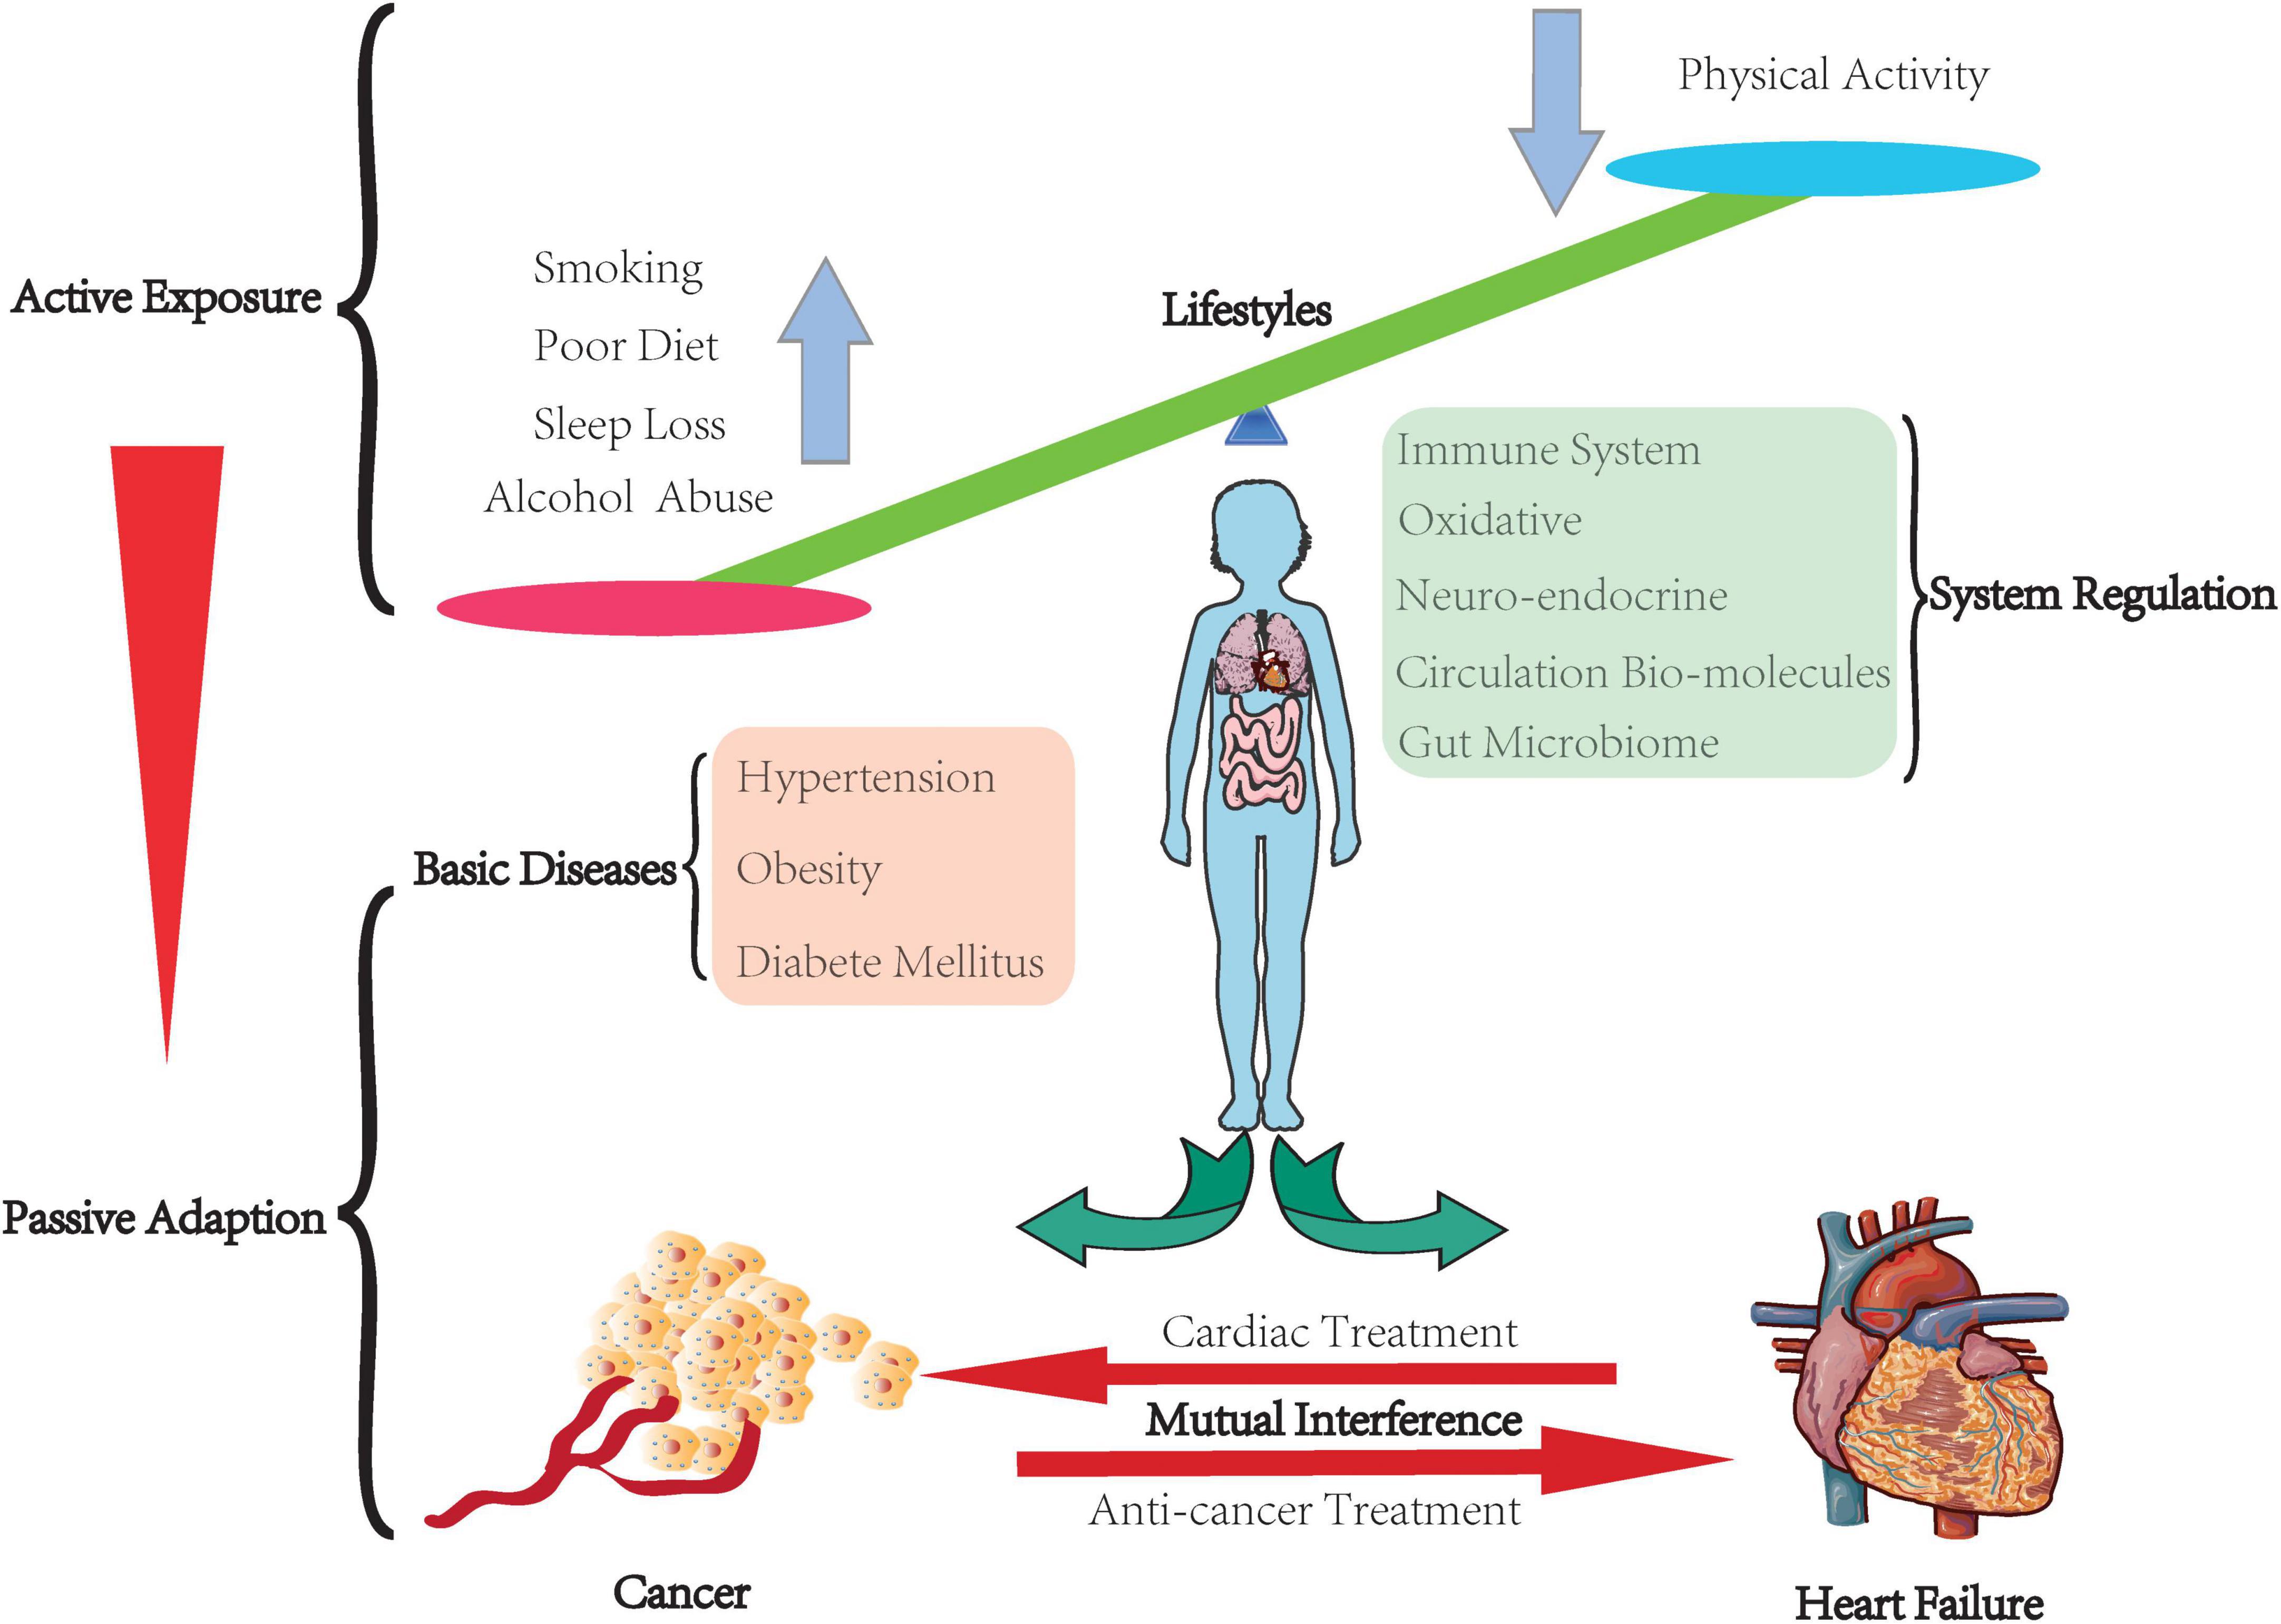 Frontiers | Heart failure and cancer: From active exposure to 